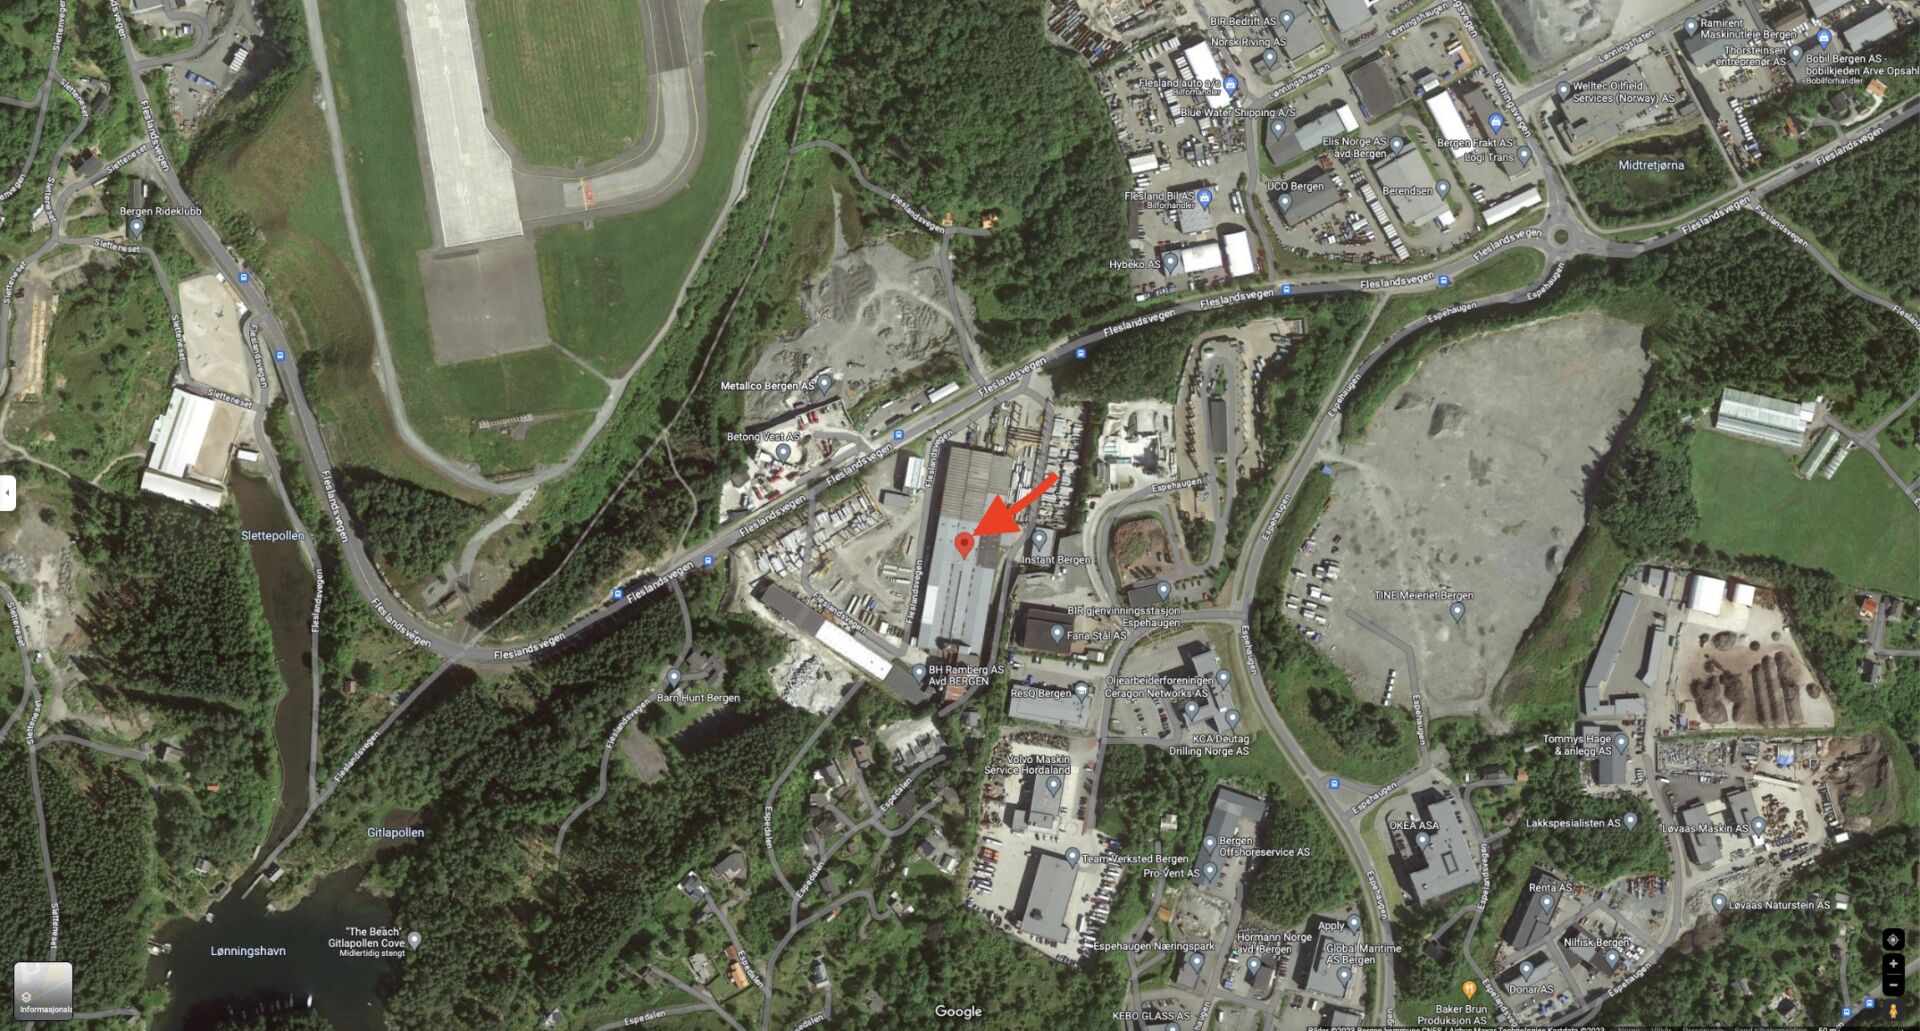 An image showing a map with a red arrow identifying an address in Bergen, Norway